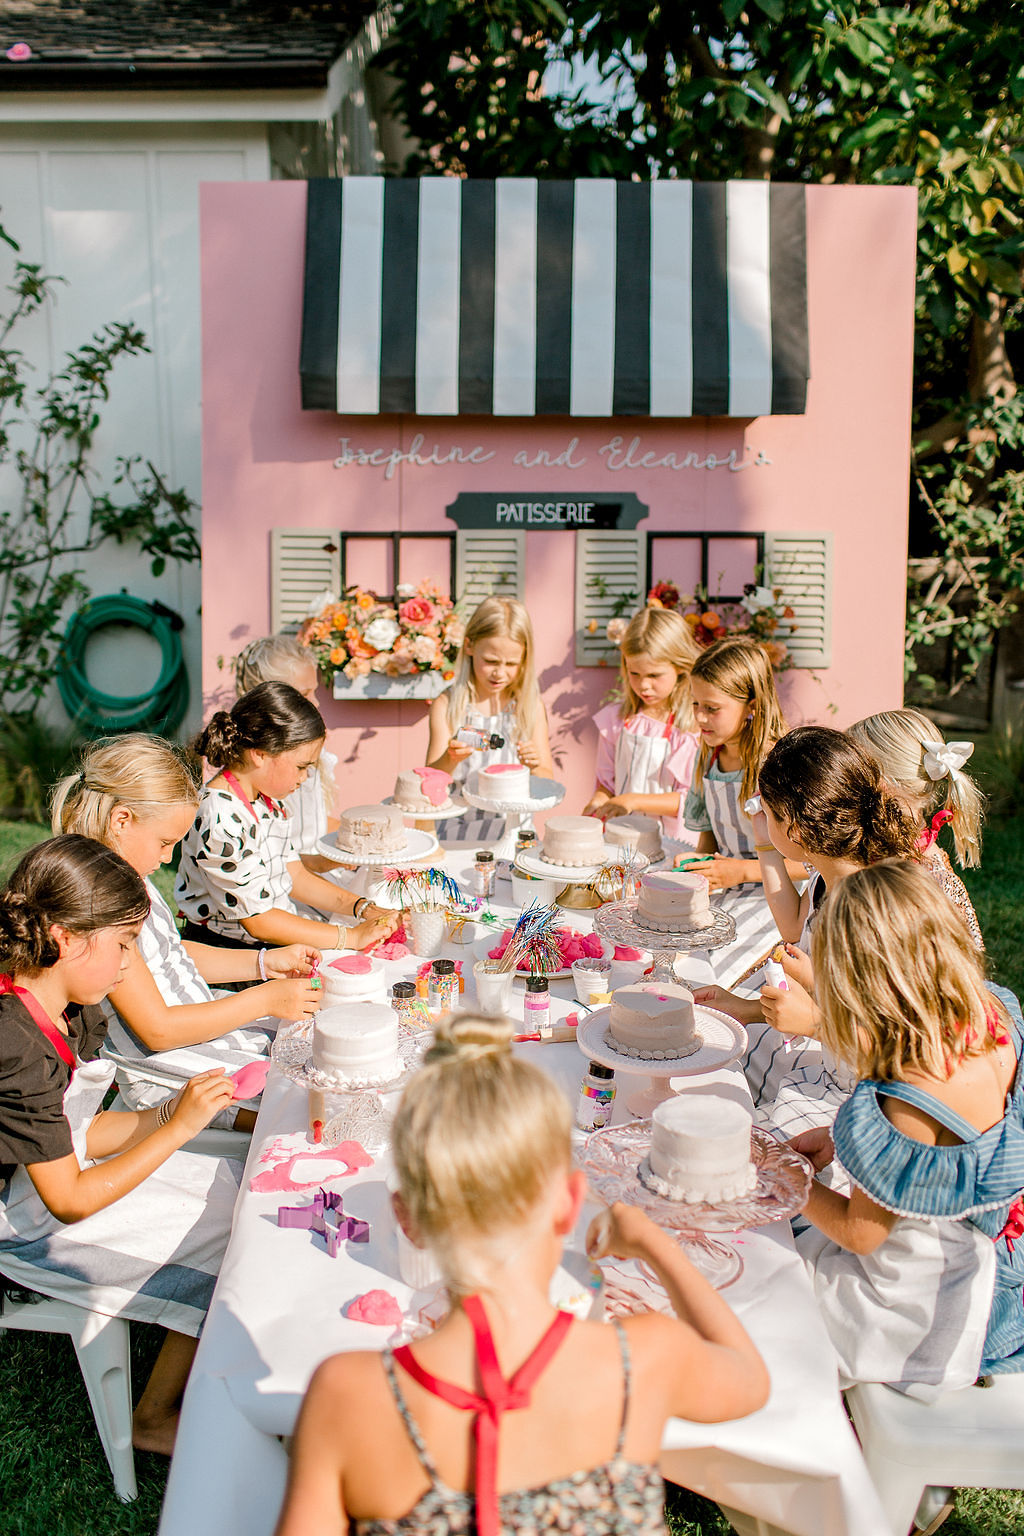 French Patisserie themed kids birthday party